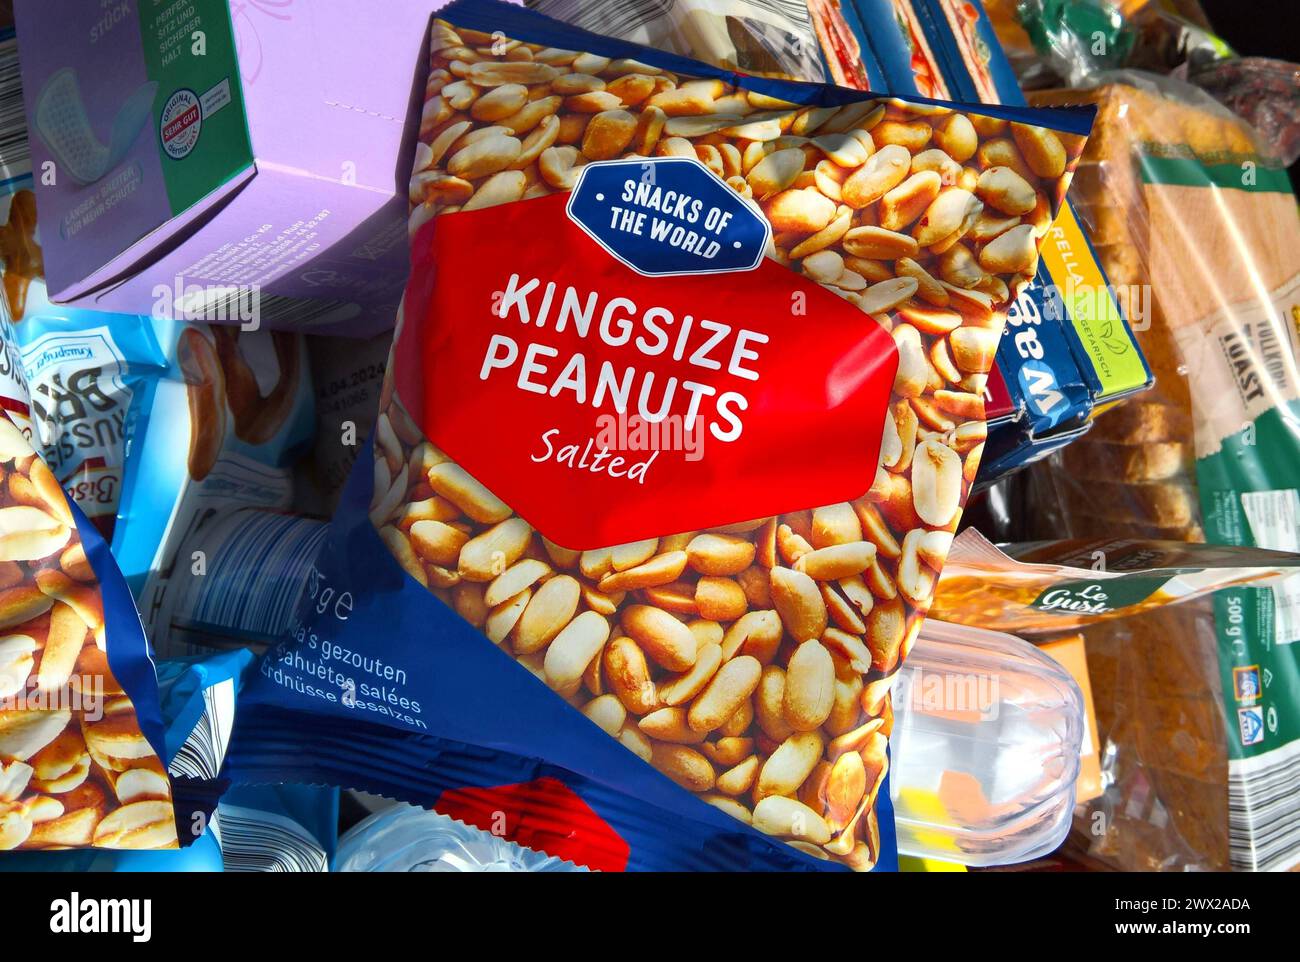 Snacks of the World - Kingsize Penuts Salted, gesalzene Erdnüsse *** Snacks of the World Kingsize Penuts Salted, salted peanuts Stock Photo